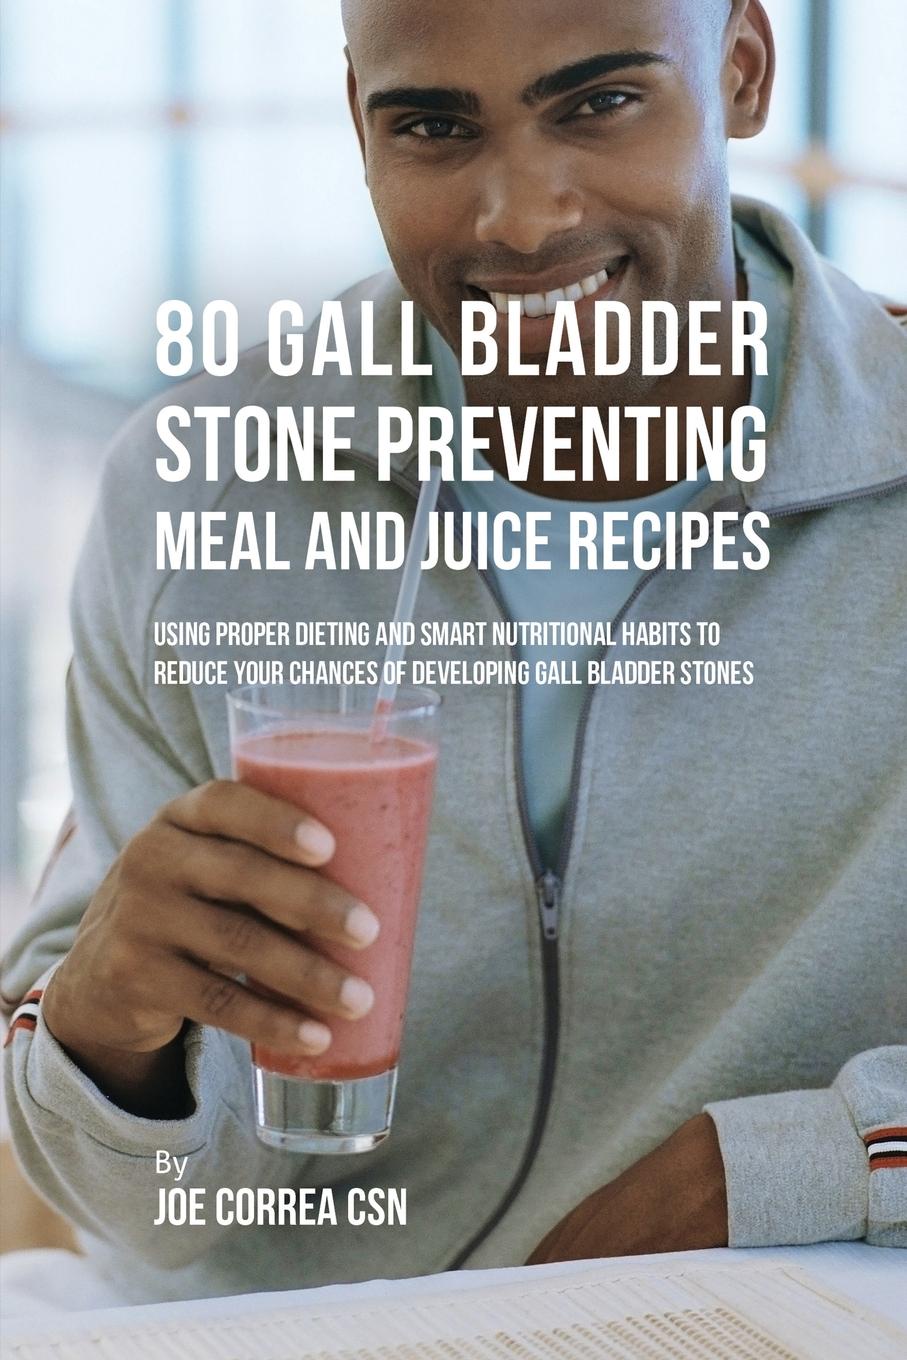 фото 80 Gallbladder Stone Preventing Meal and Juice Recipes. Using Proper Dieting and Smart Nutritional Habits to Reduce Your Chances of Developing Gall Bladder Stones